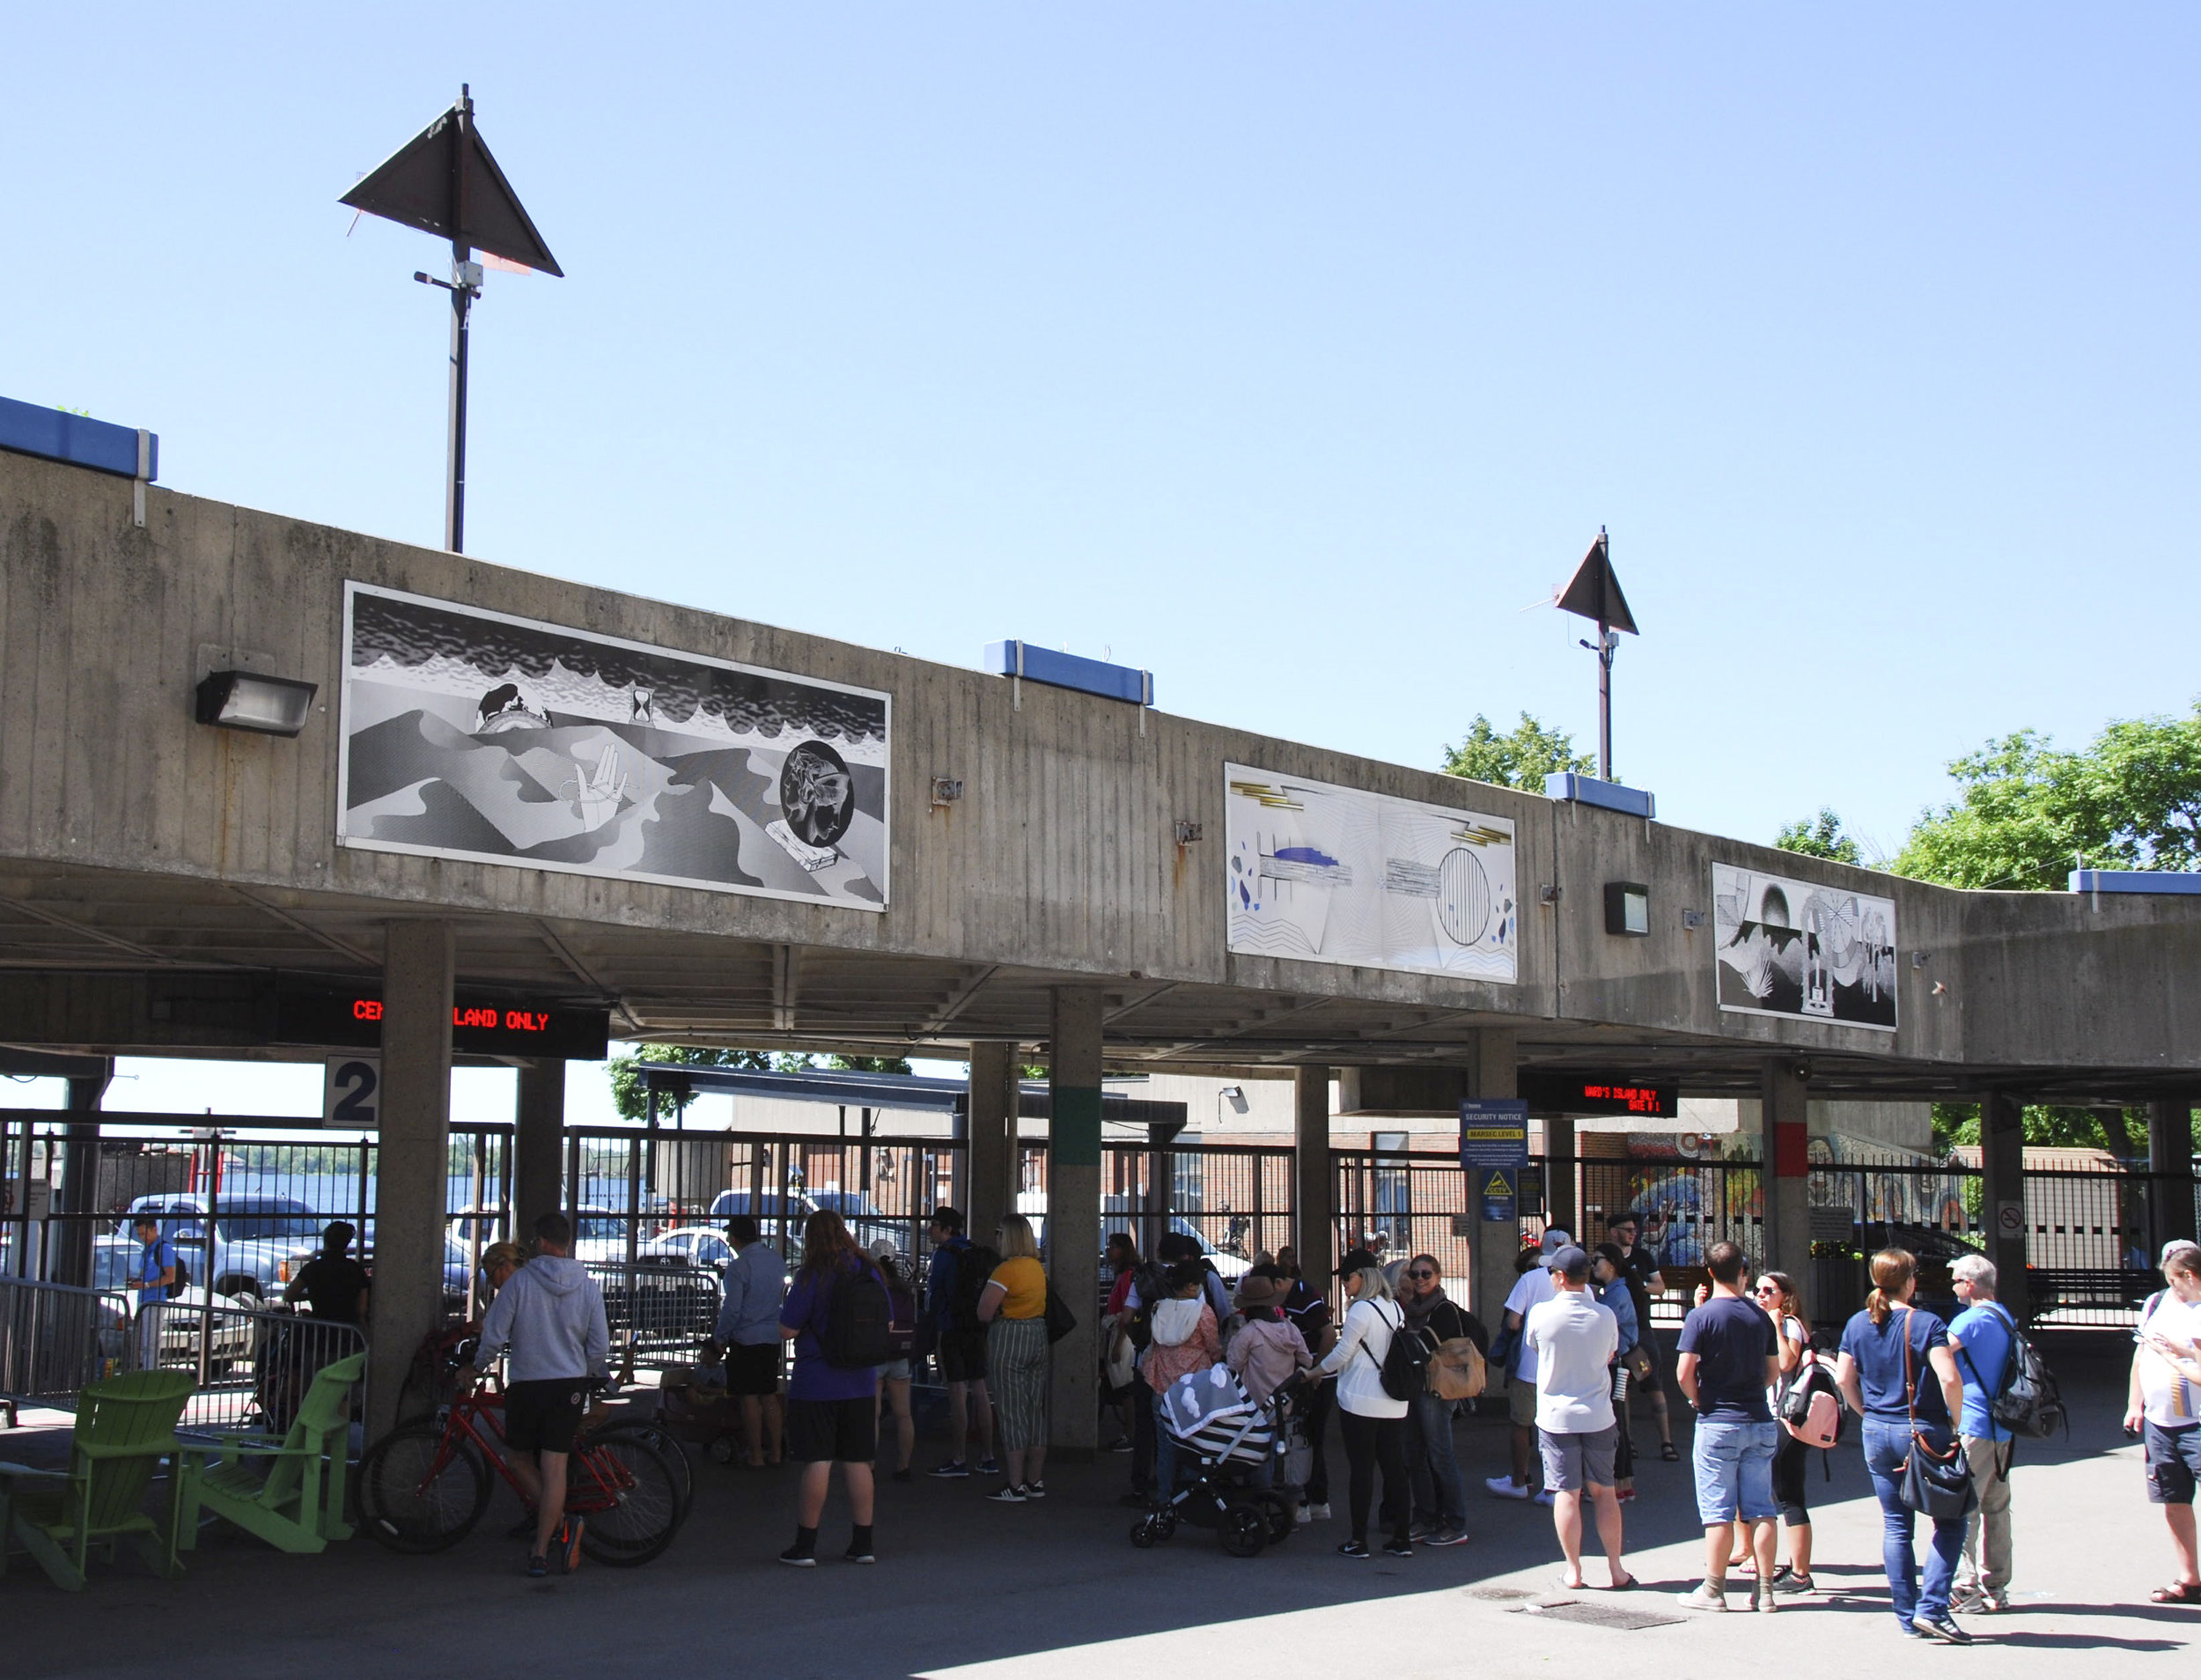  over horizon beyond  Jack Layton Ferry Terminal Toronto  four billboards, approx 3’ x 10’ each  (alternating with four billboards by Melissa Fisher-Rozenberg)  installation shot  curated by Lake Effects Projects  2018 